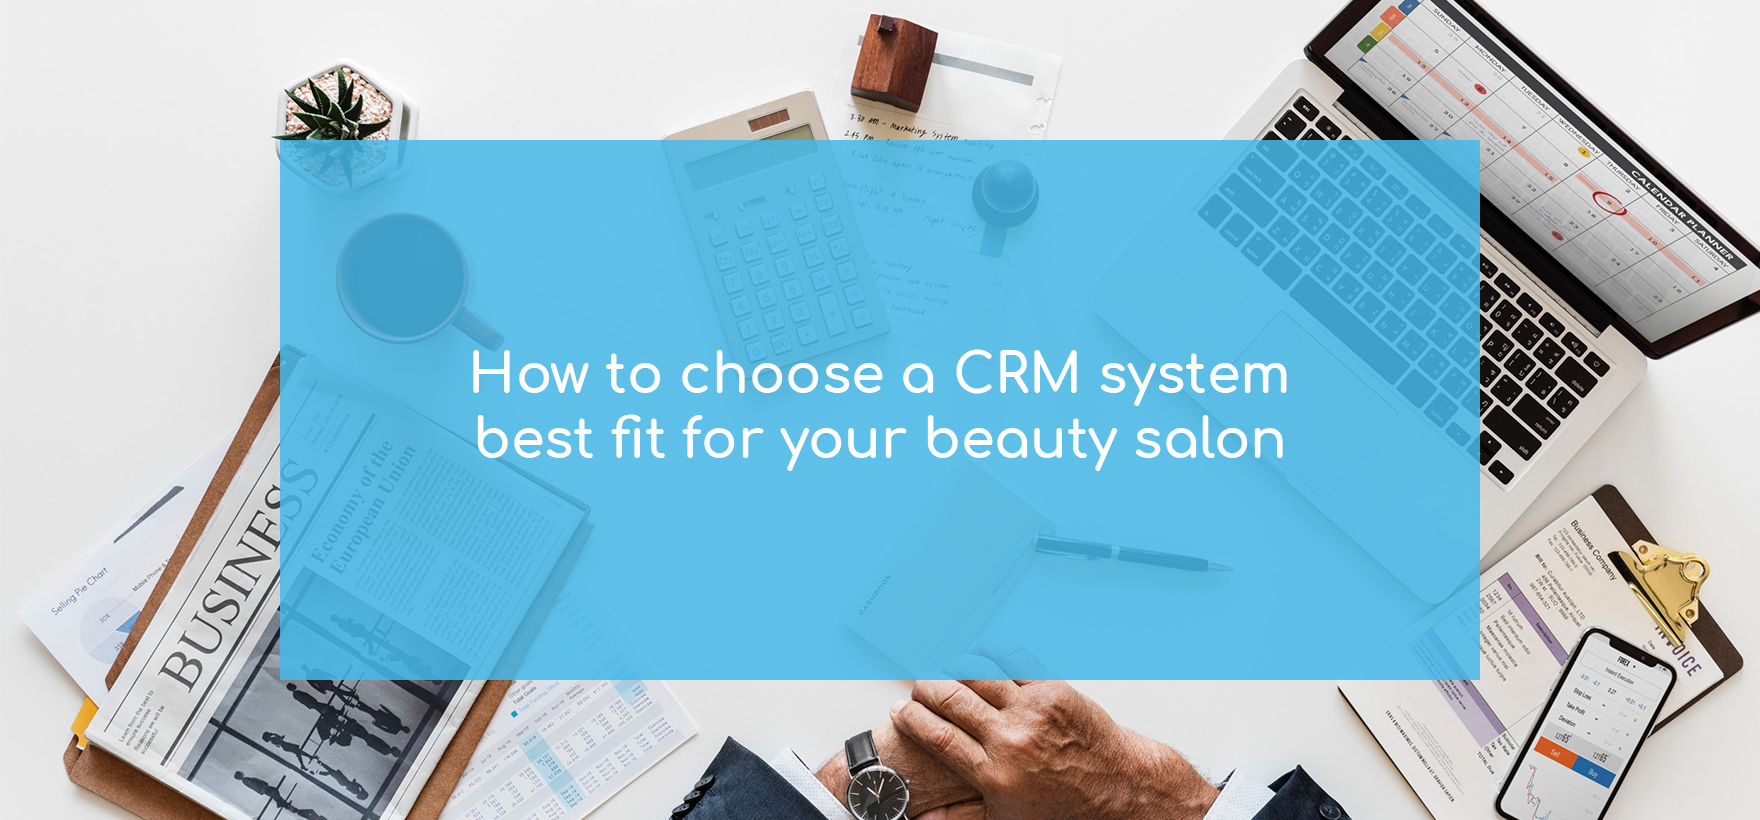 How to choose a CRM system best fit for your beauty salon